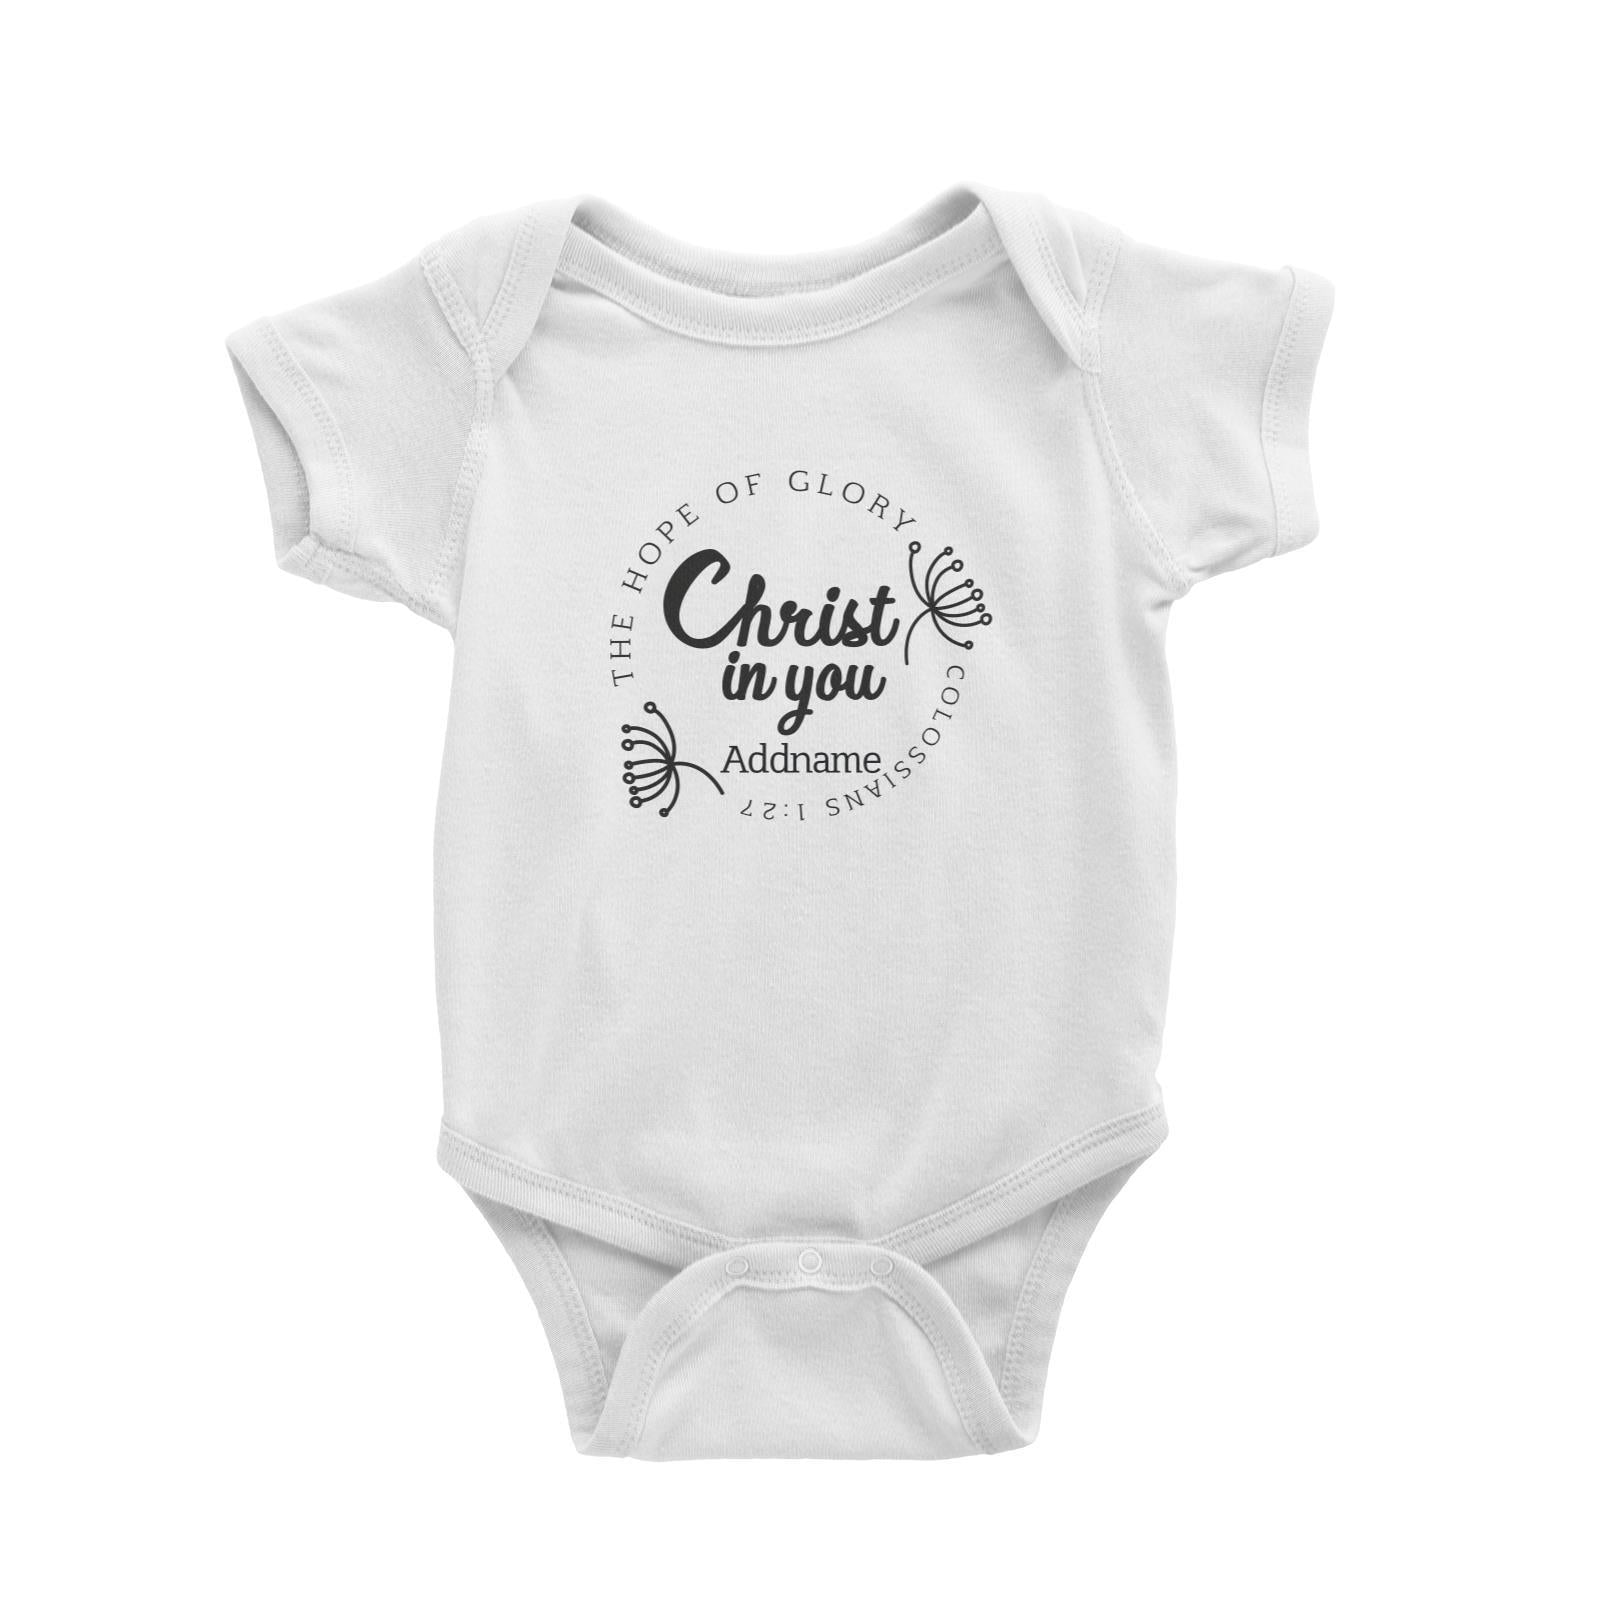 Christian Series The Hope Of Glory Christ In You Colossians 1.27 Addname Baby Romper